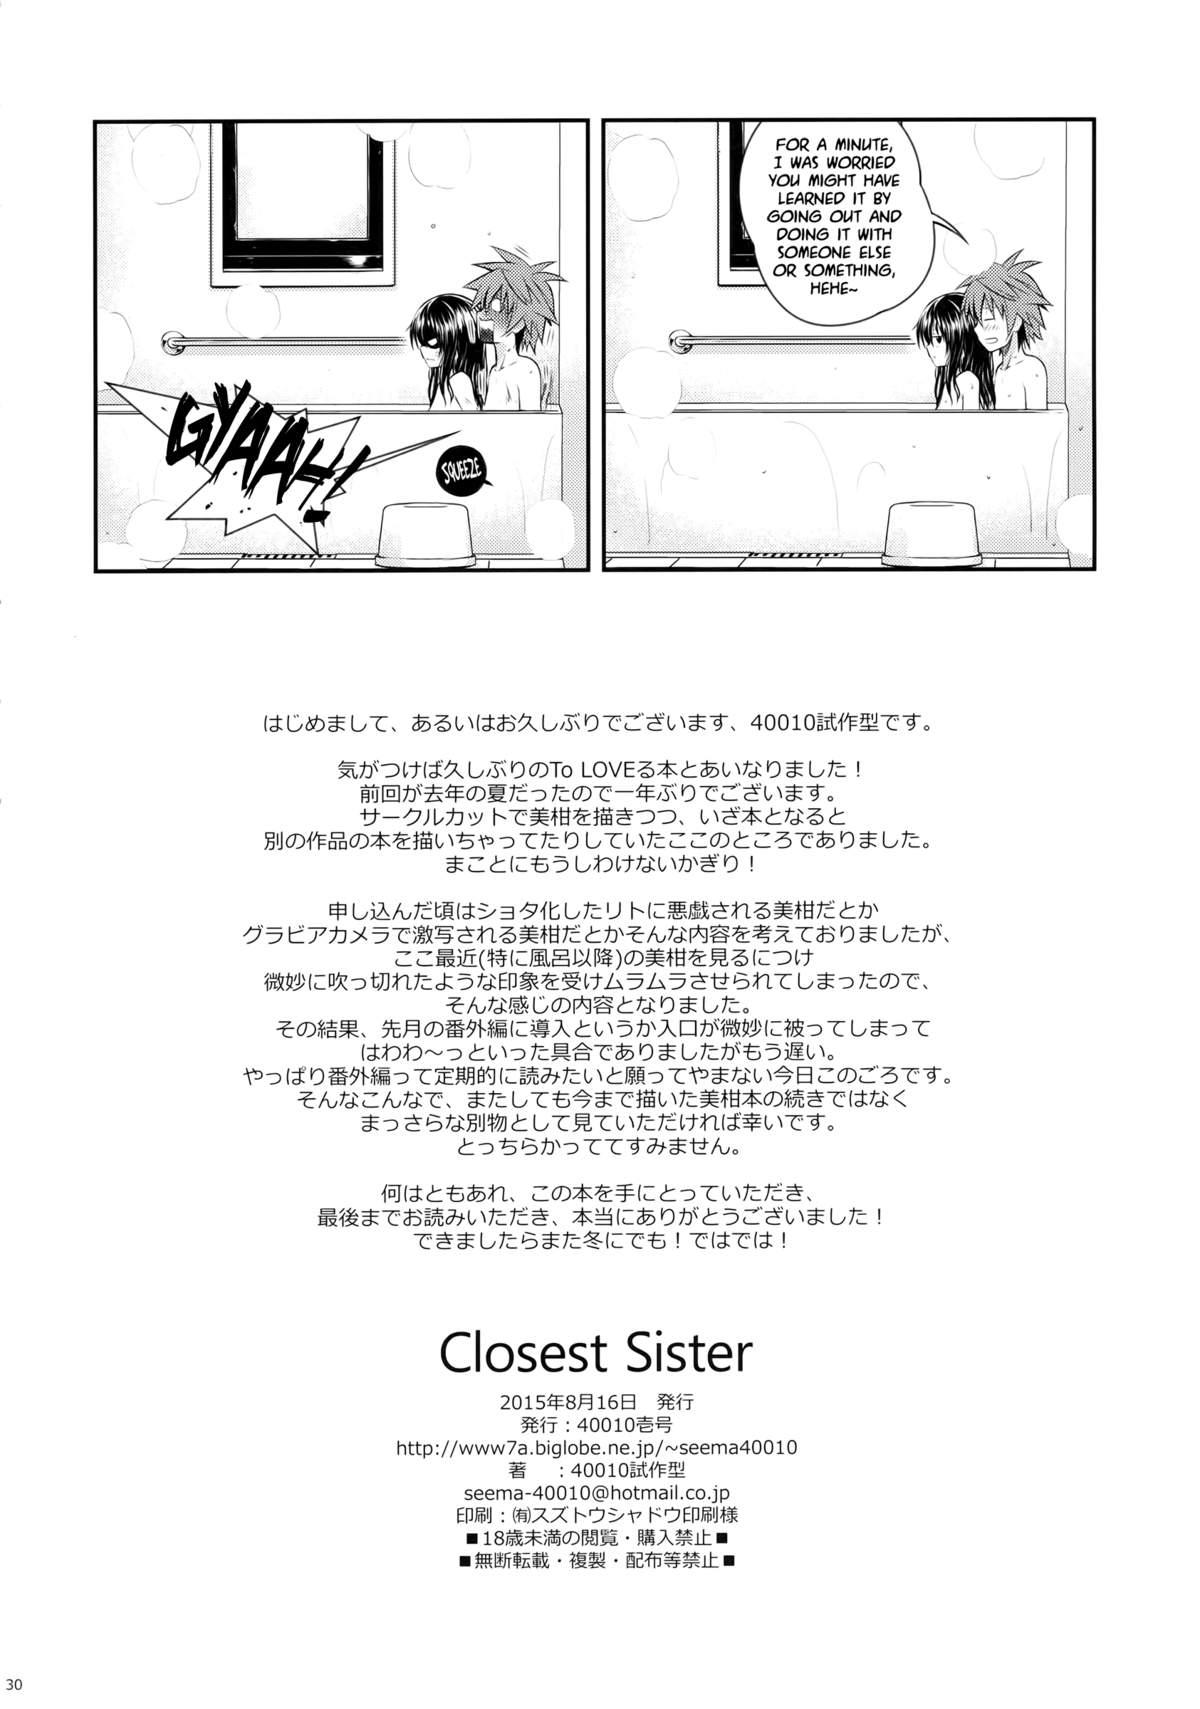 Closest Sister 28